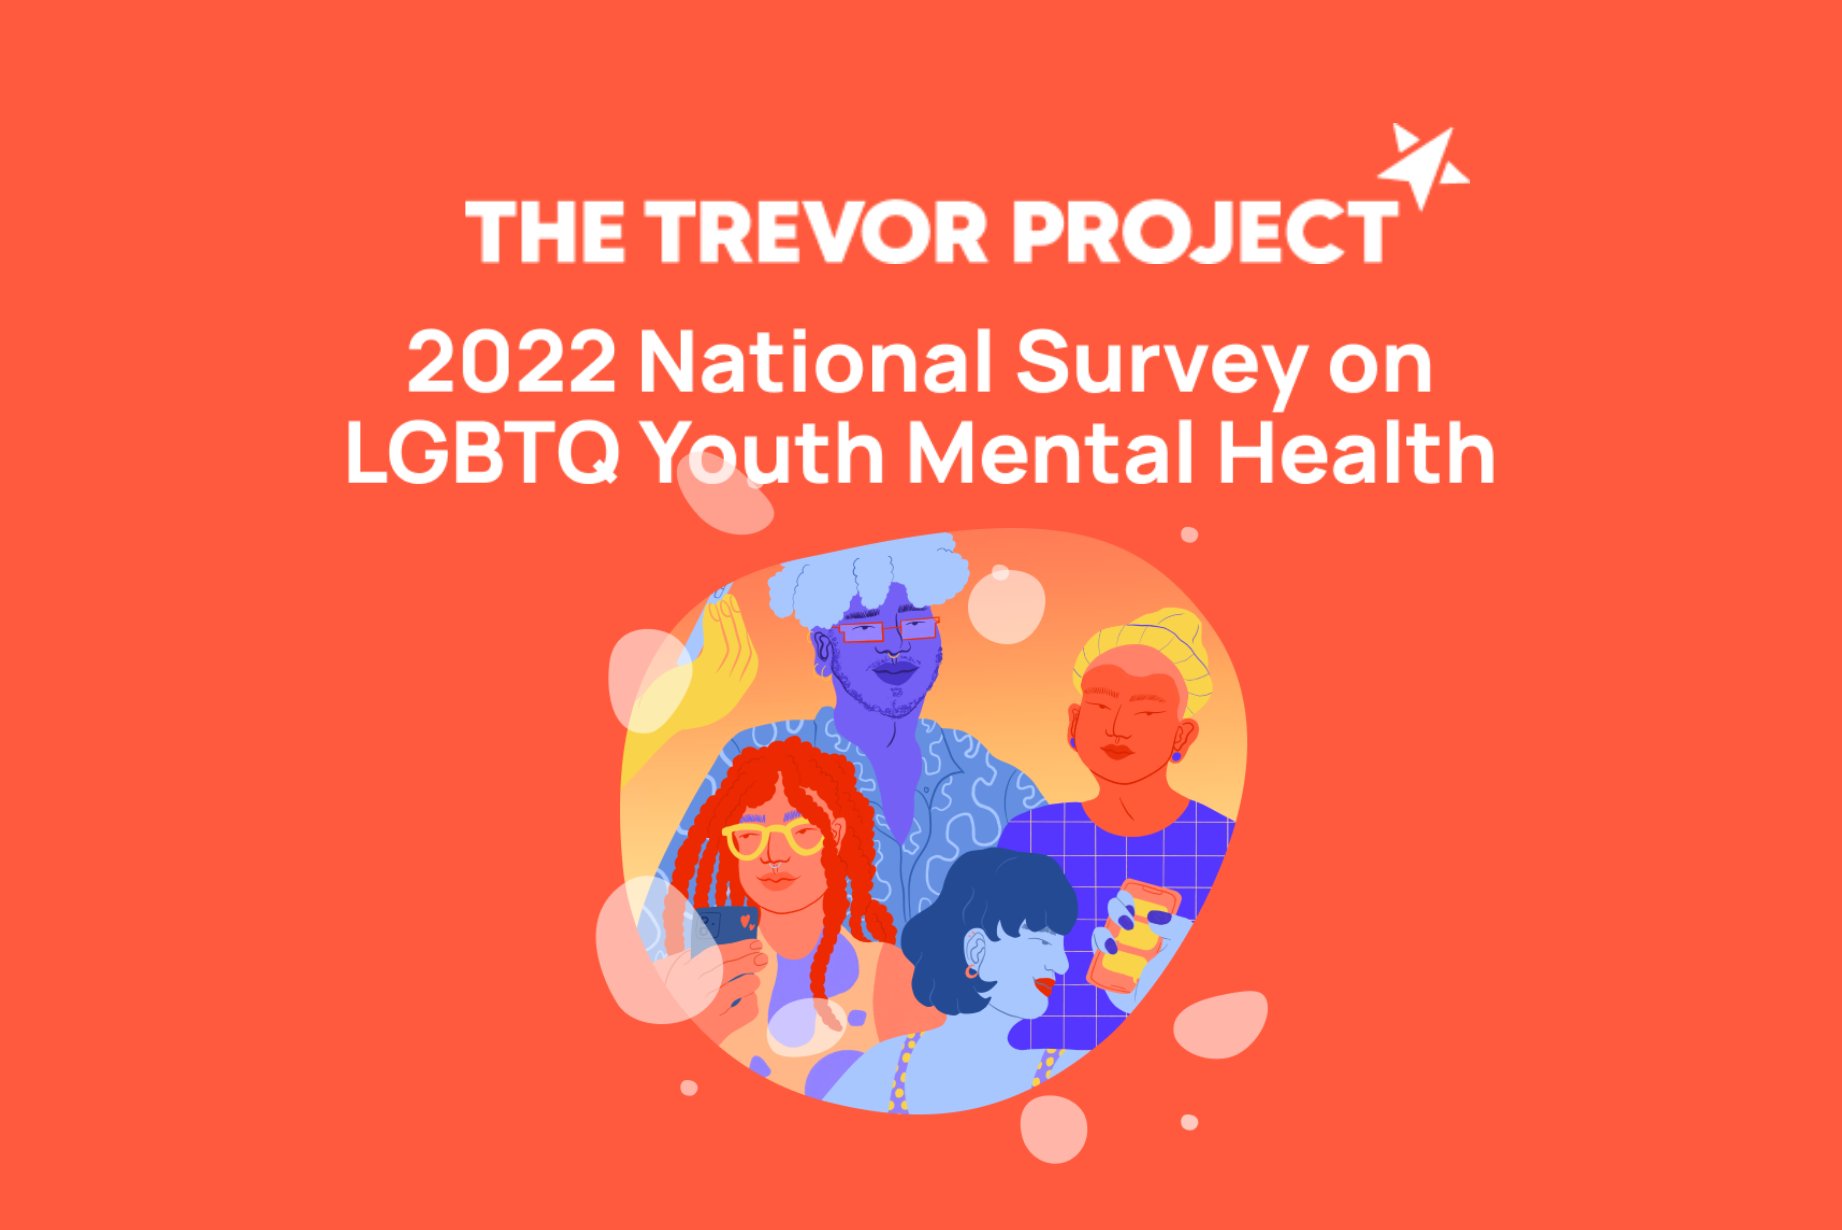 Orange banner with colorful youth illustration for The Trevor Project 2022 National Survey on LGBTQ Youth Mental Health.